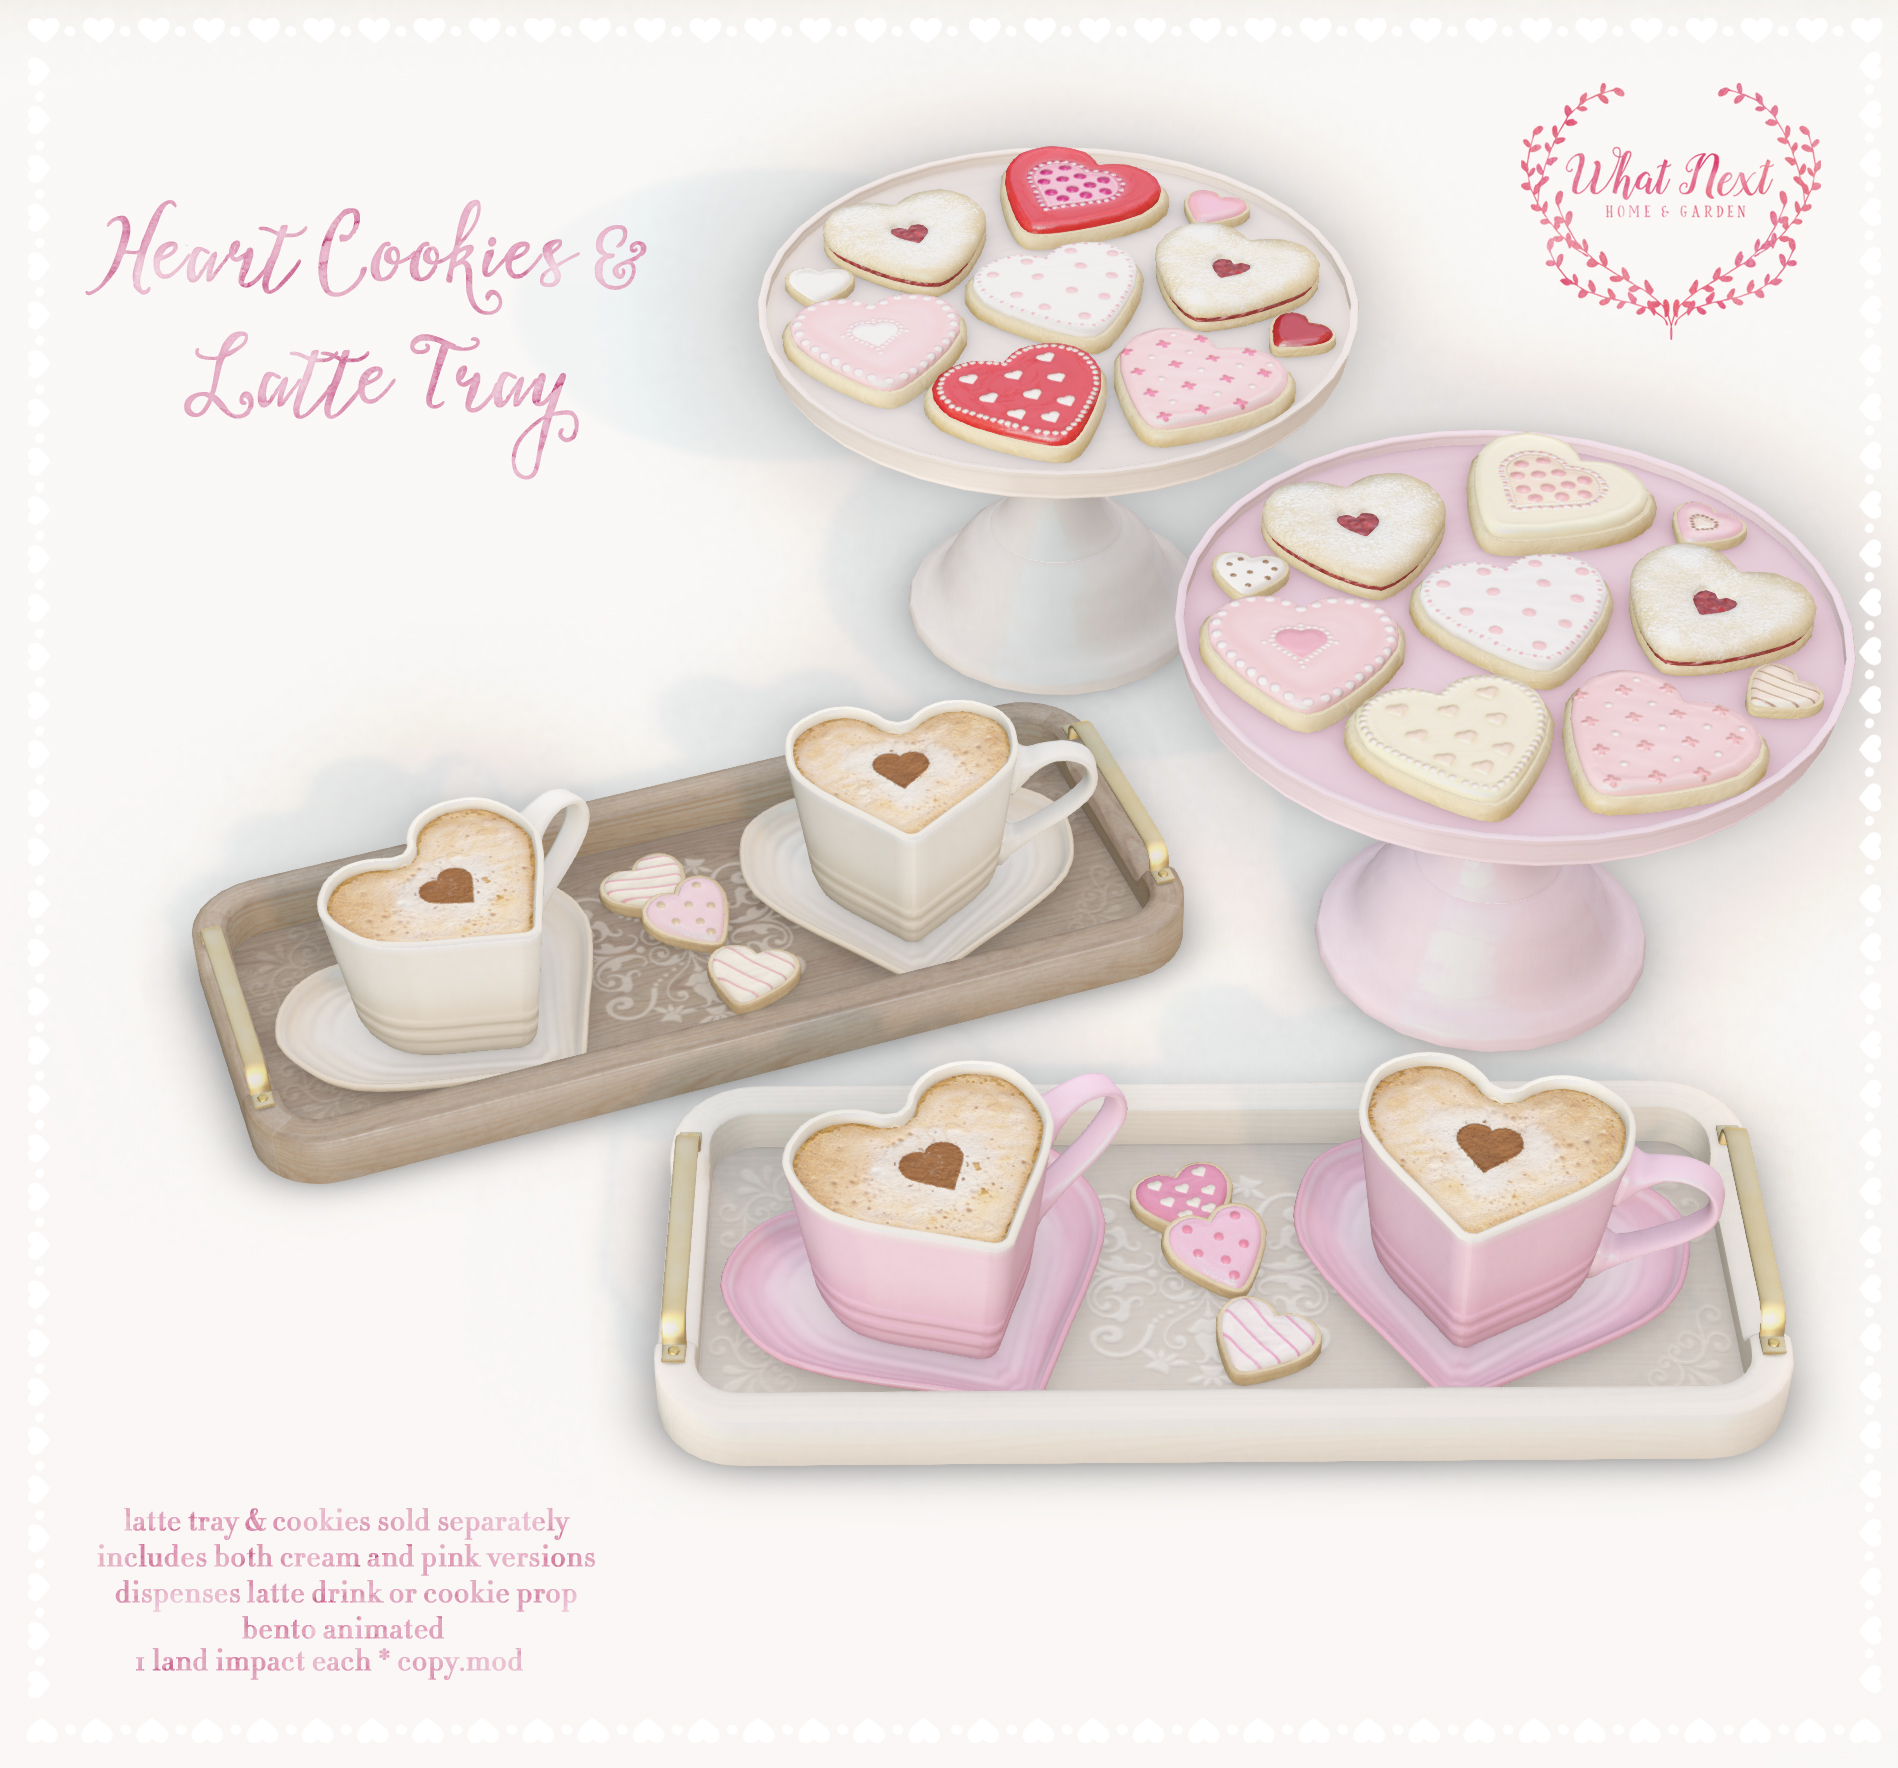 What Next – Heart Cookies and Latte Tray